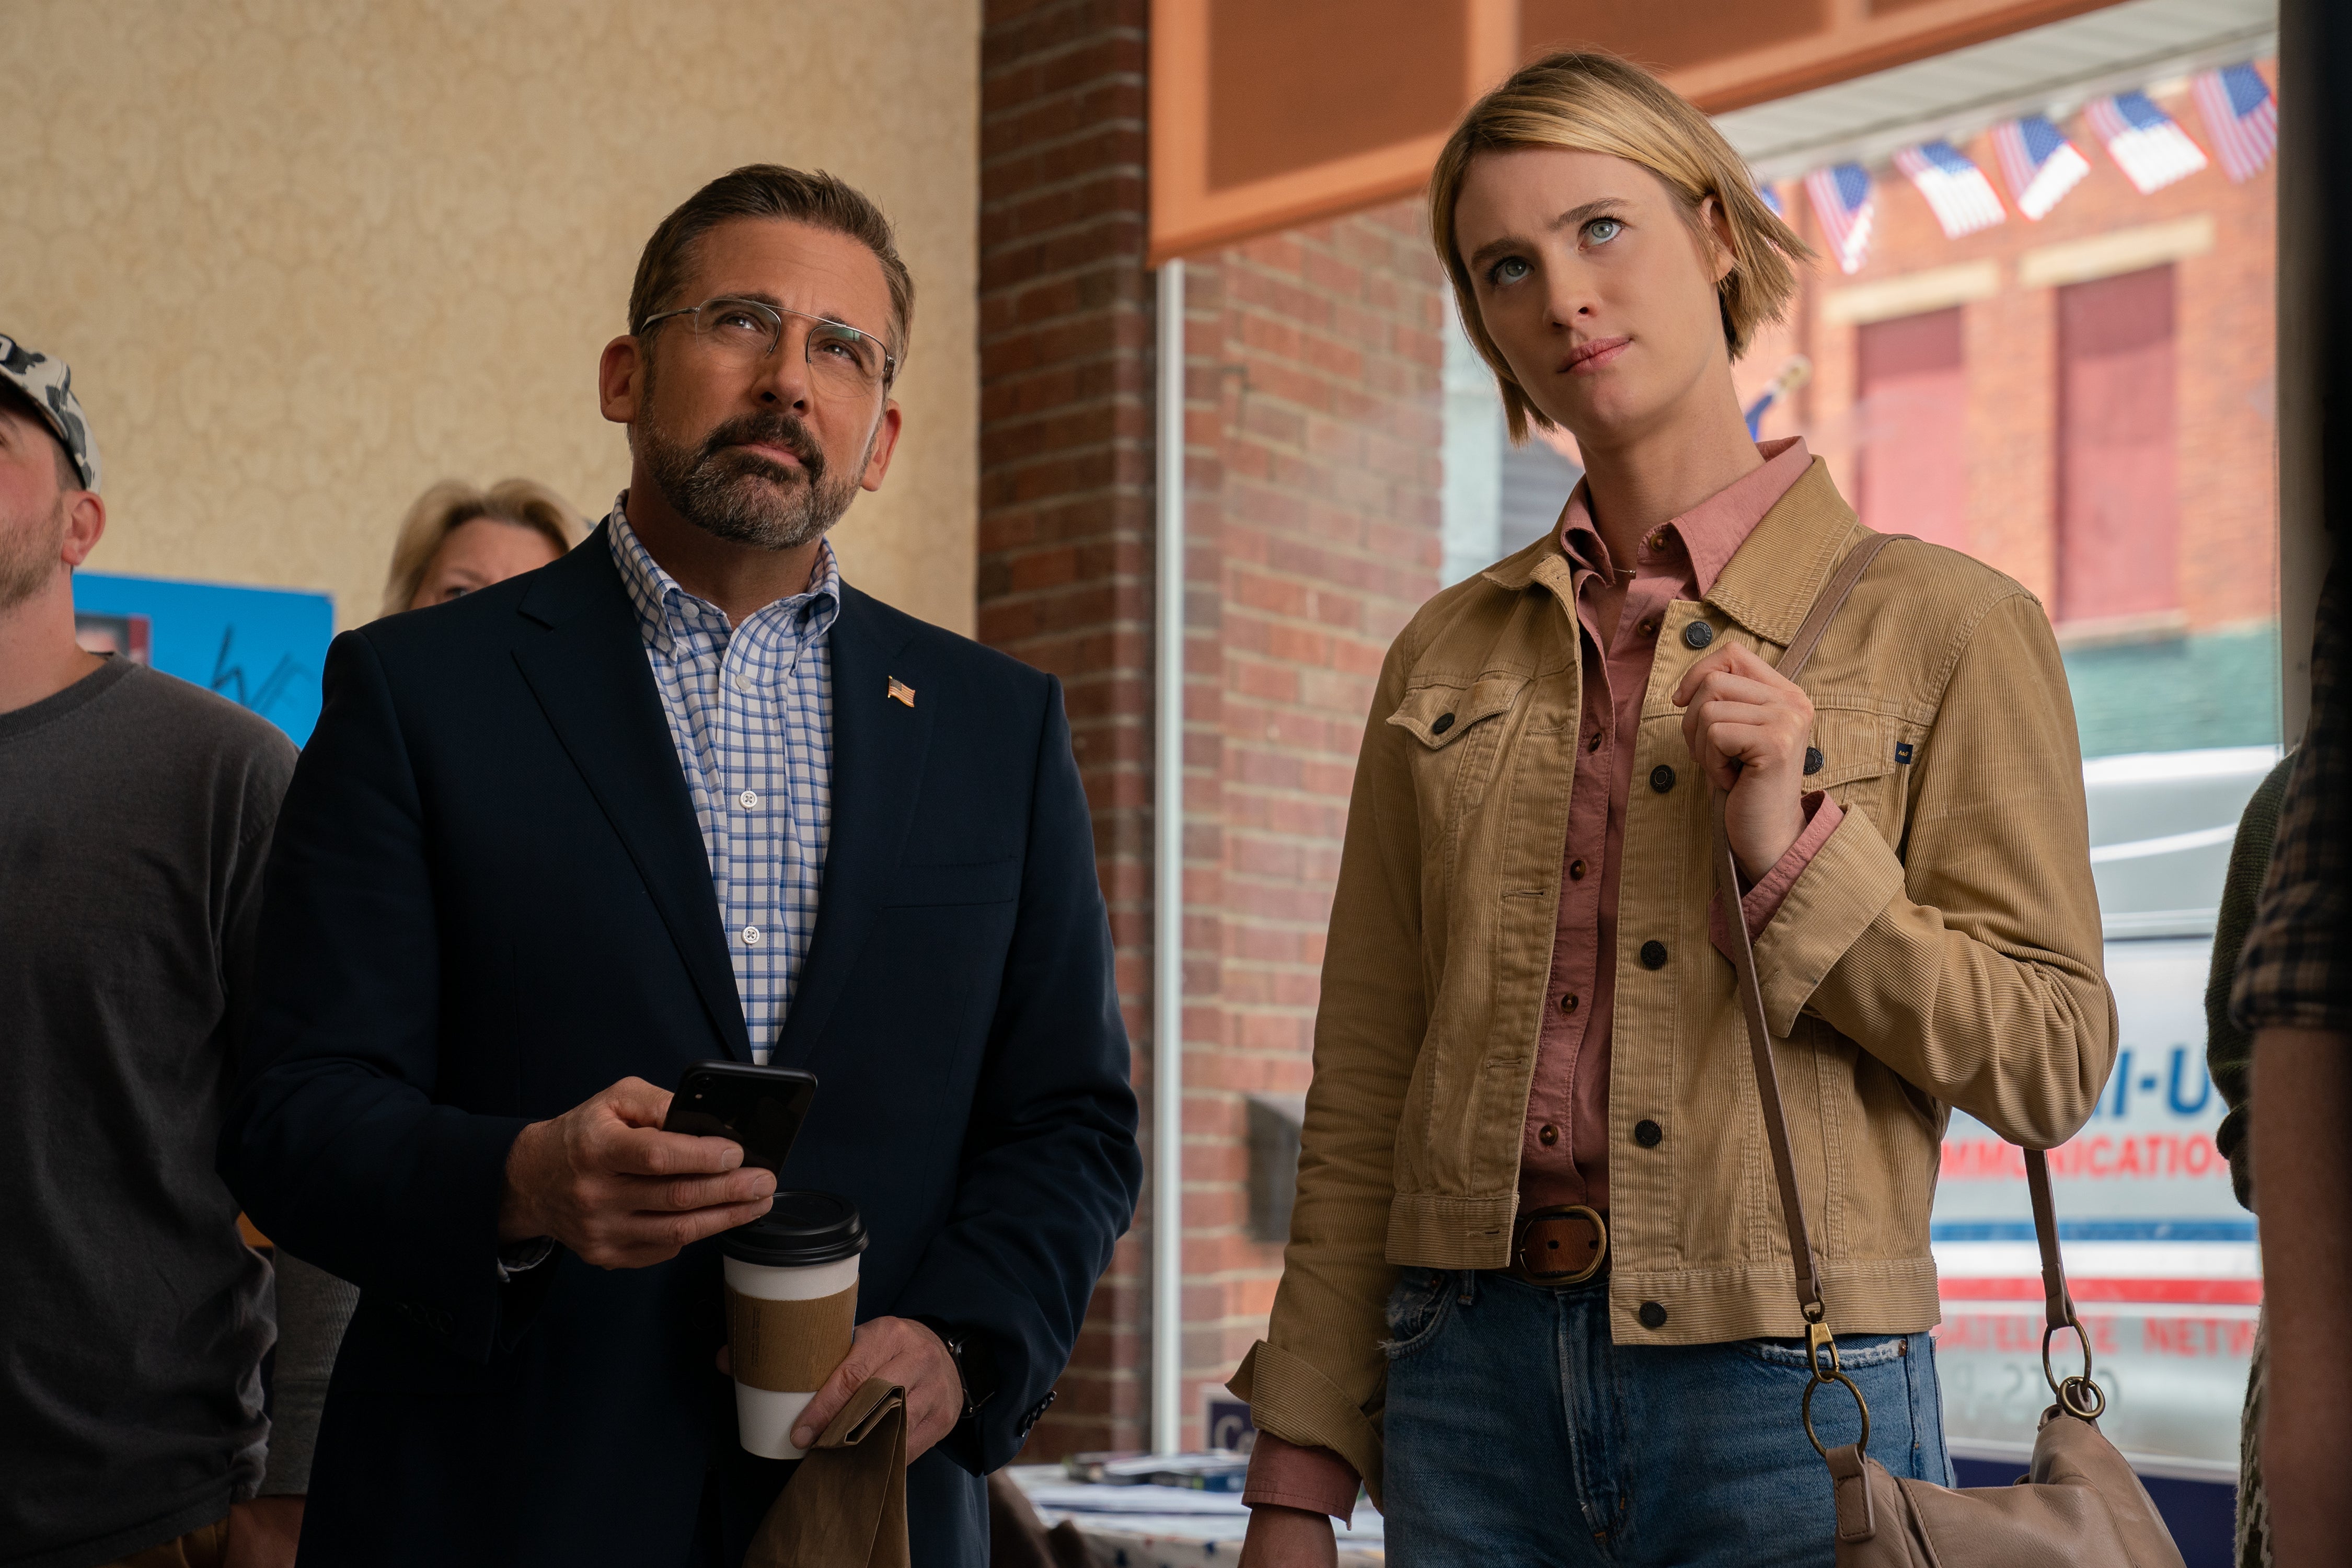 Carell wears a blazer with an American flag pin and holds a smartphone and a to-go cup of coffee. Mackenzie Davis looks comfortable in blue jeans. Neither seems to be happy with what they're watching.